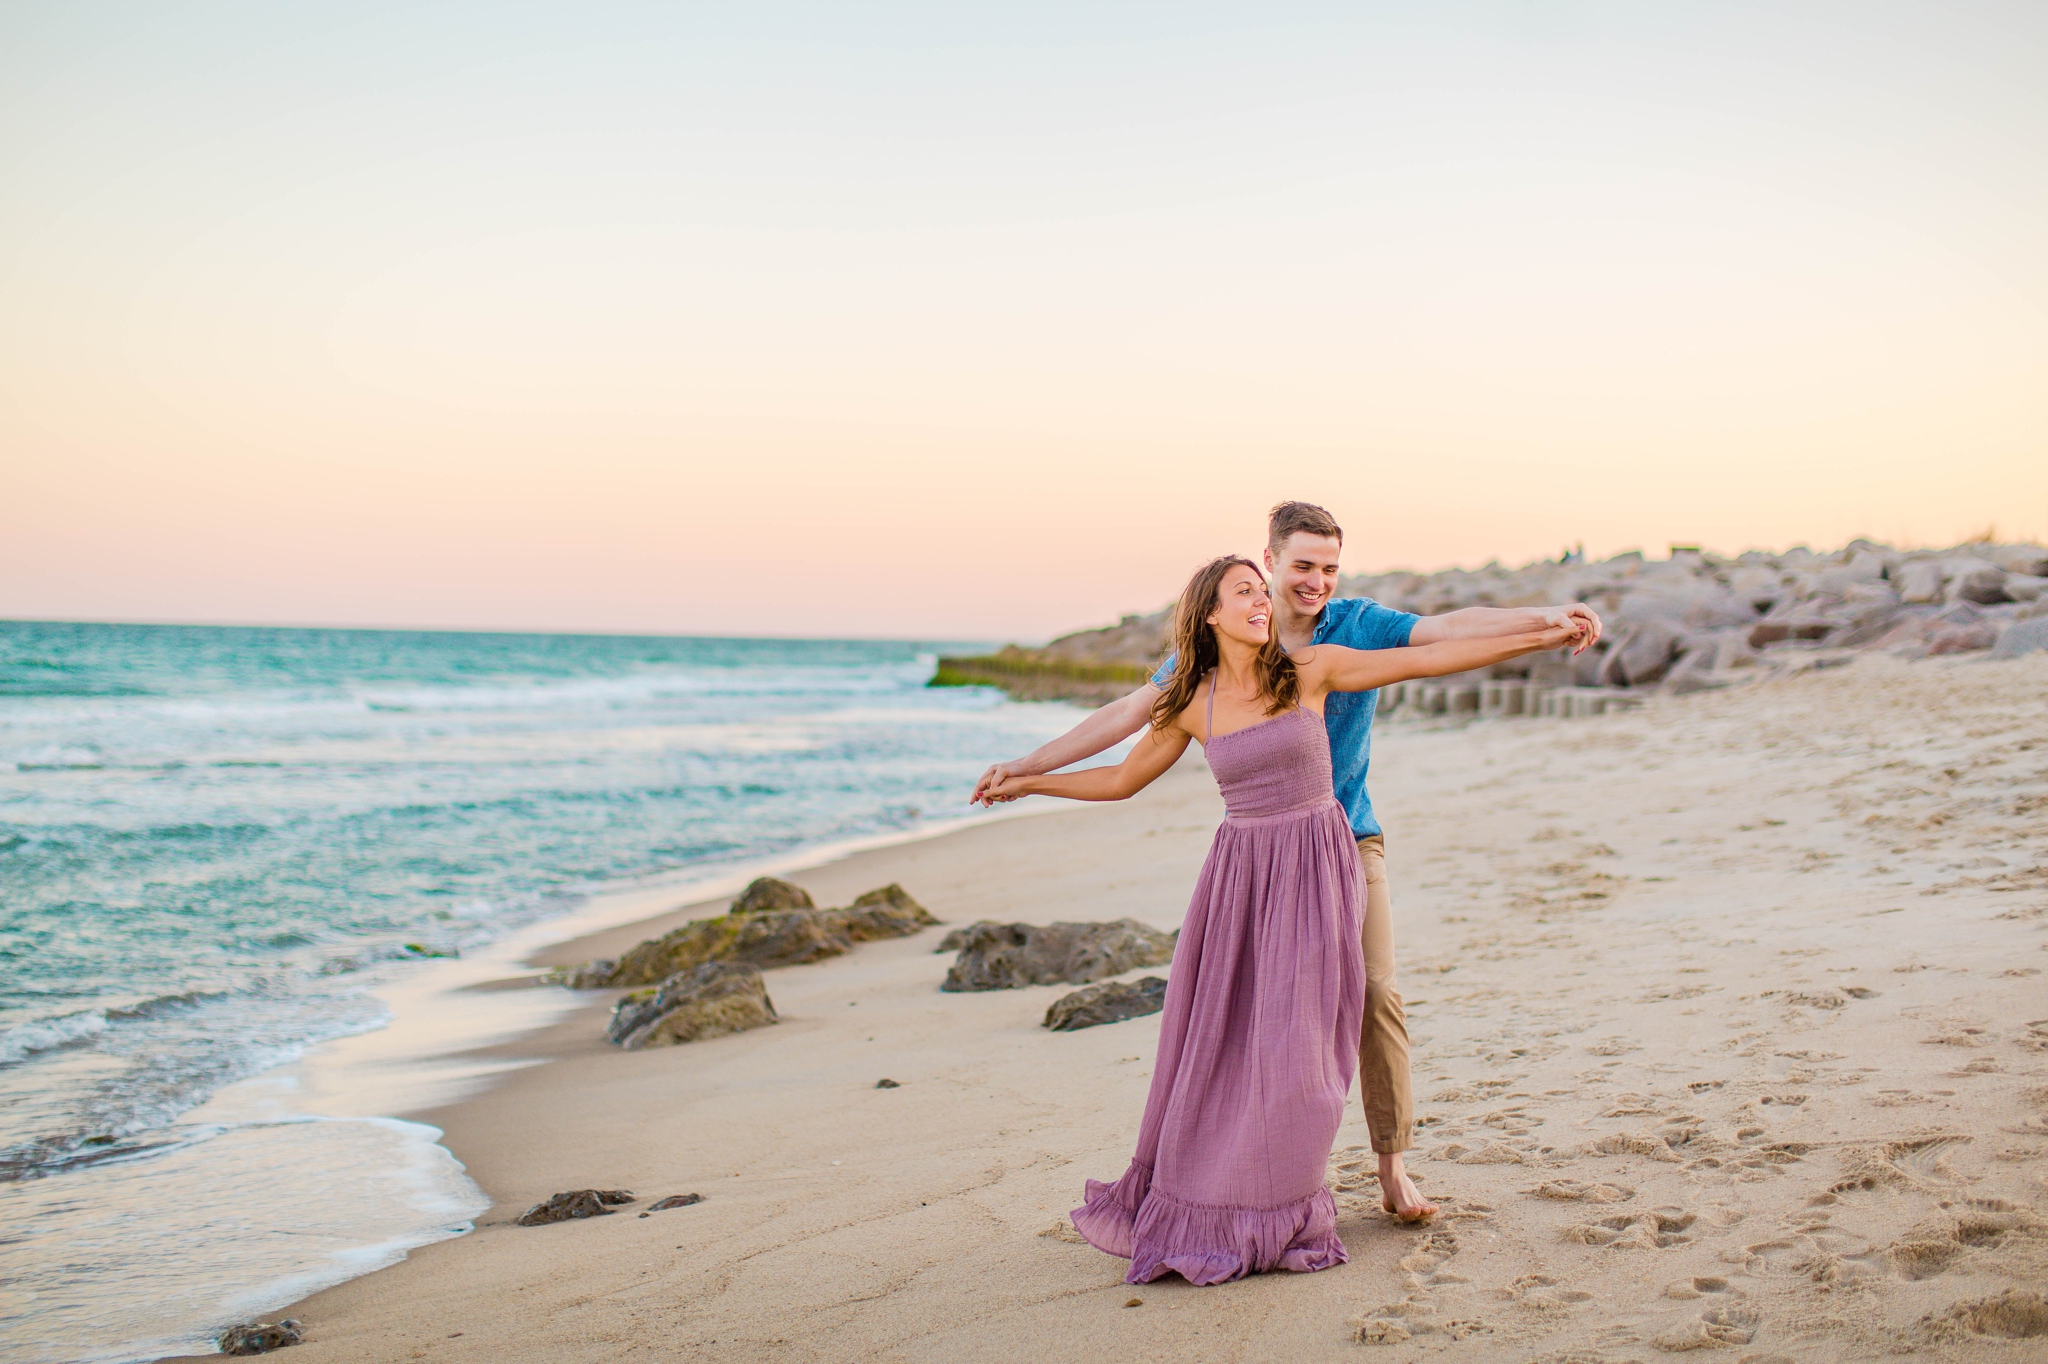  couple playing around on the beach - - Woman is in a flowy pastel maxi dress - candid and unposed golden light session - beach engagement photographer in honolulu, oahu, hawaii - johanna dye photography 